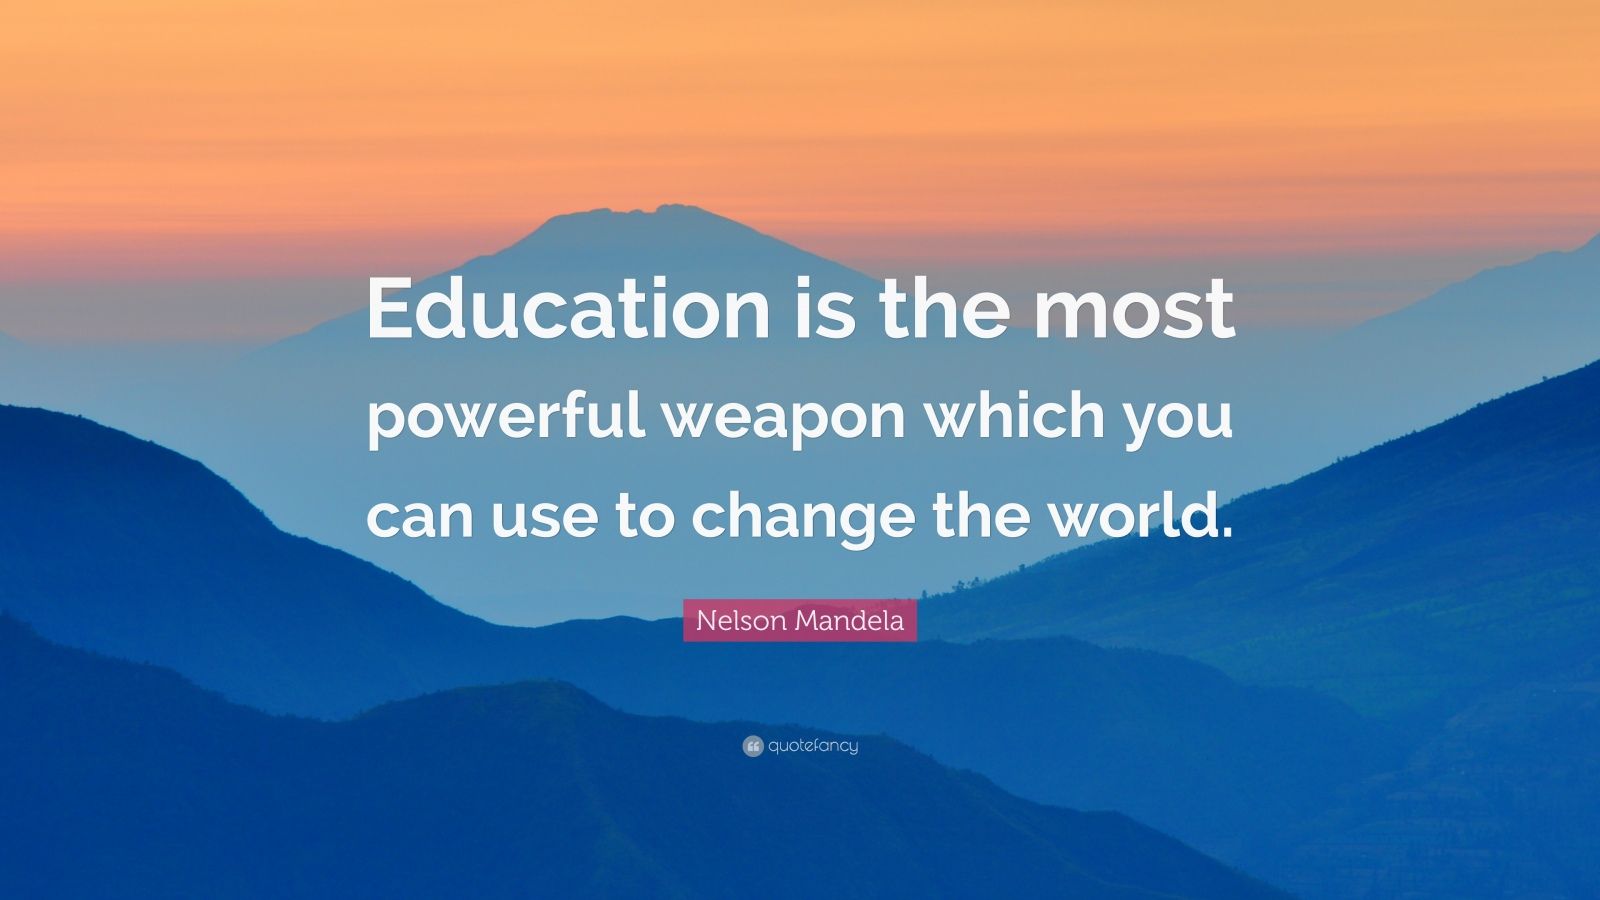 Nelson Mandela Quote: “Education is the most powerful weapon which you